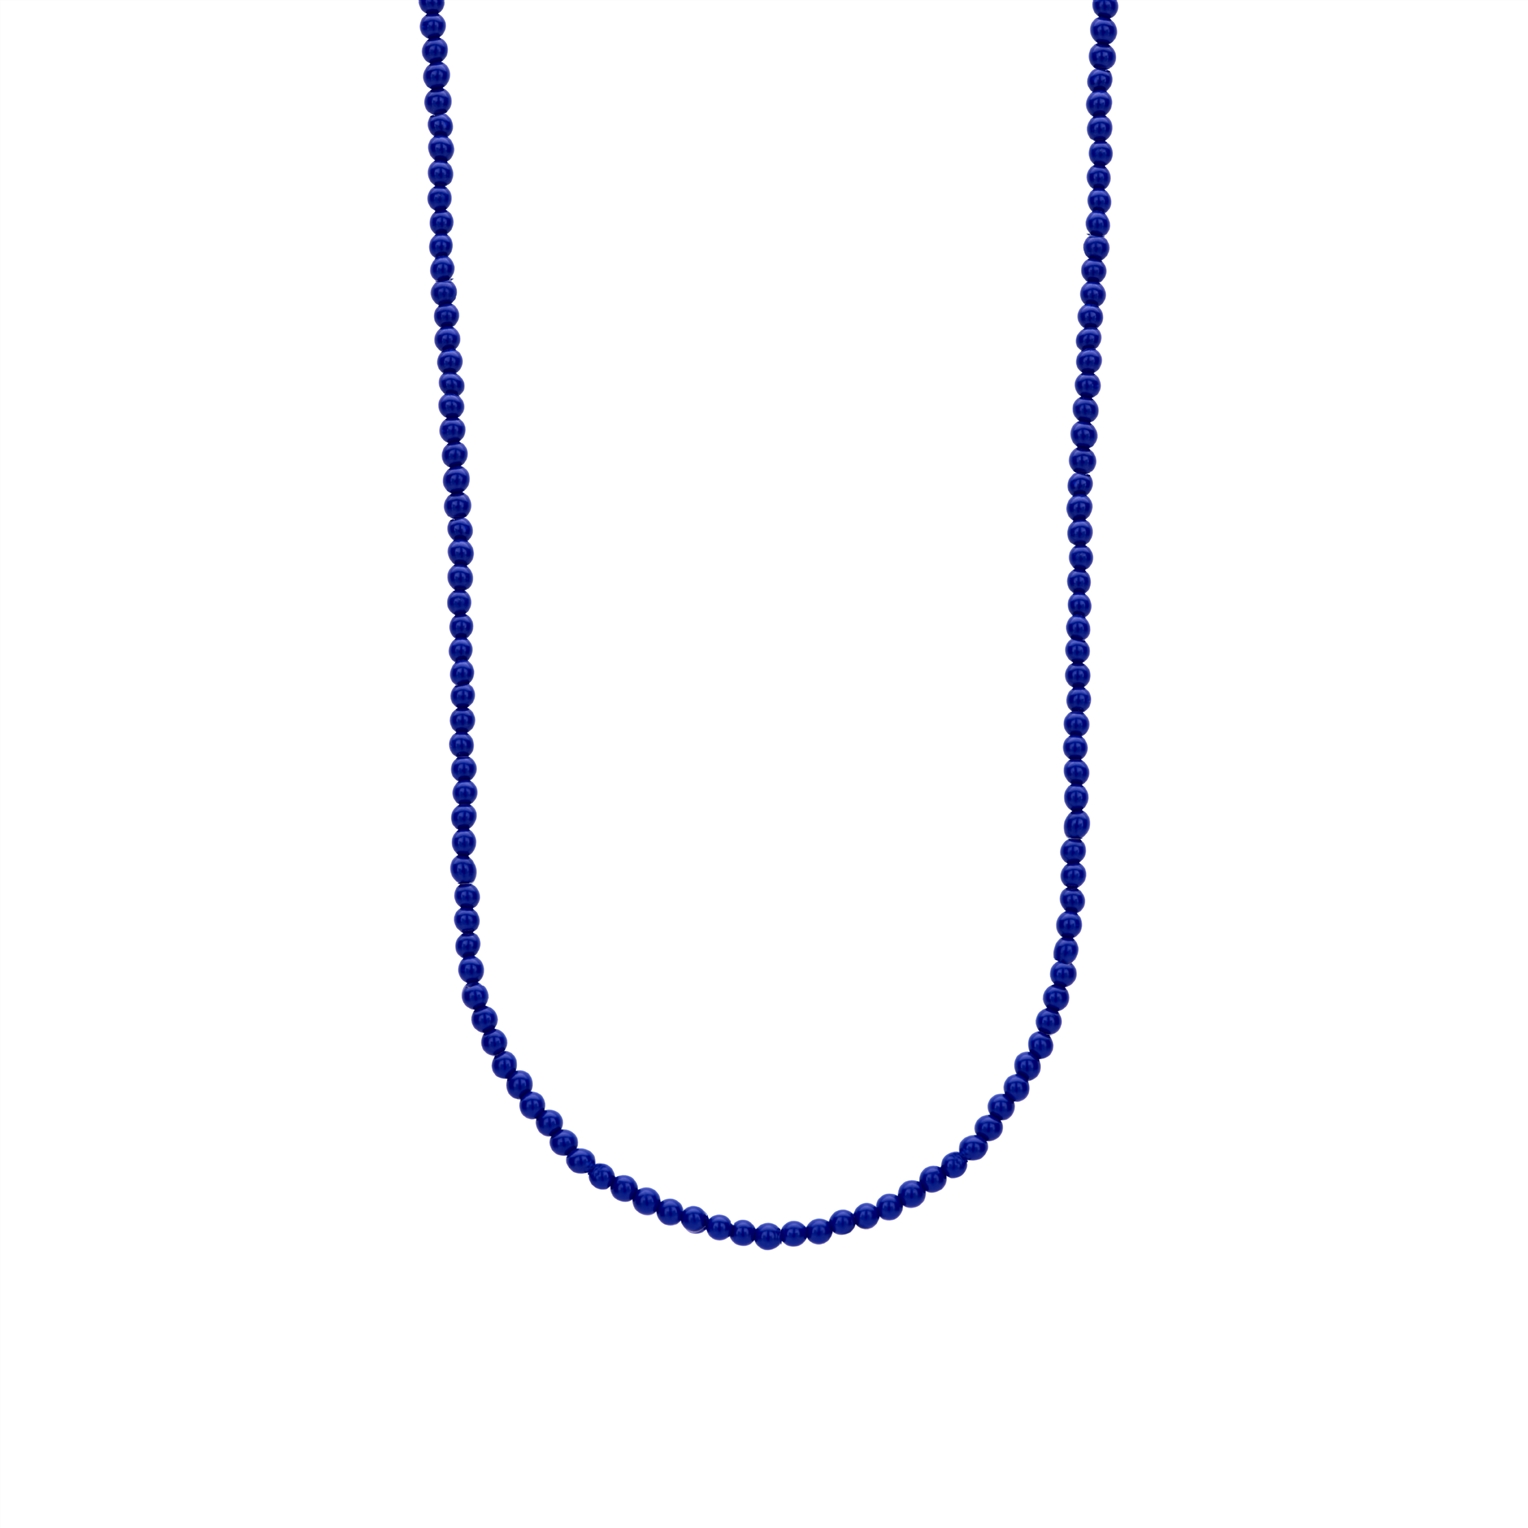 Gold chain necklace clipart #137675 at Graphics Factory. - Clip Art Library